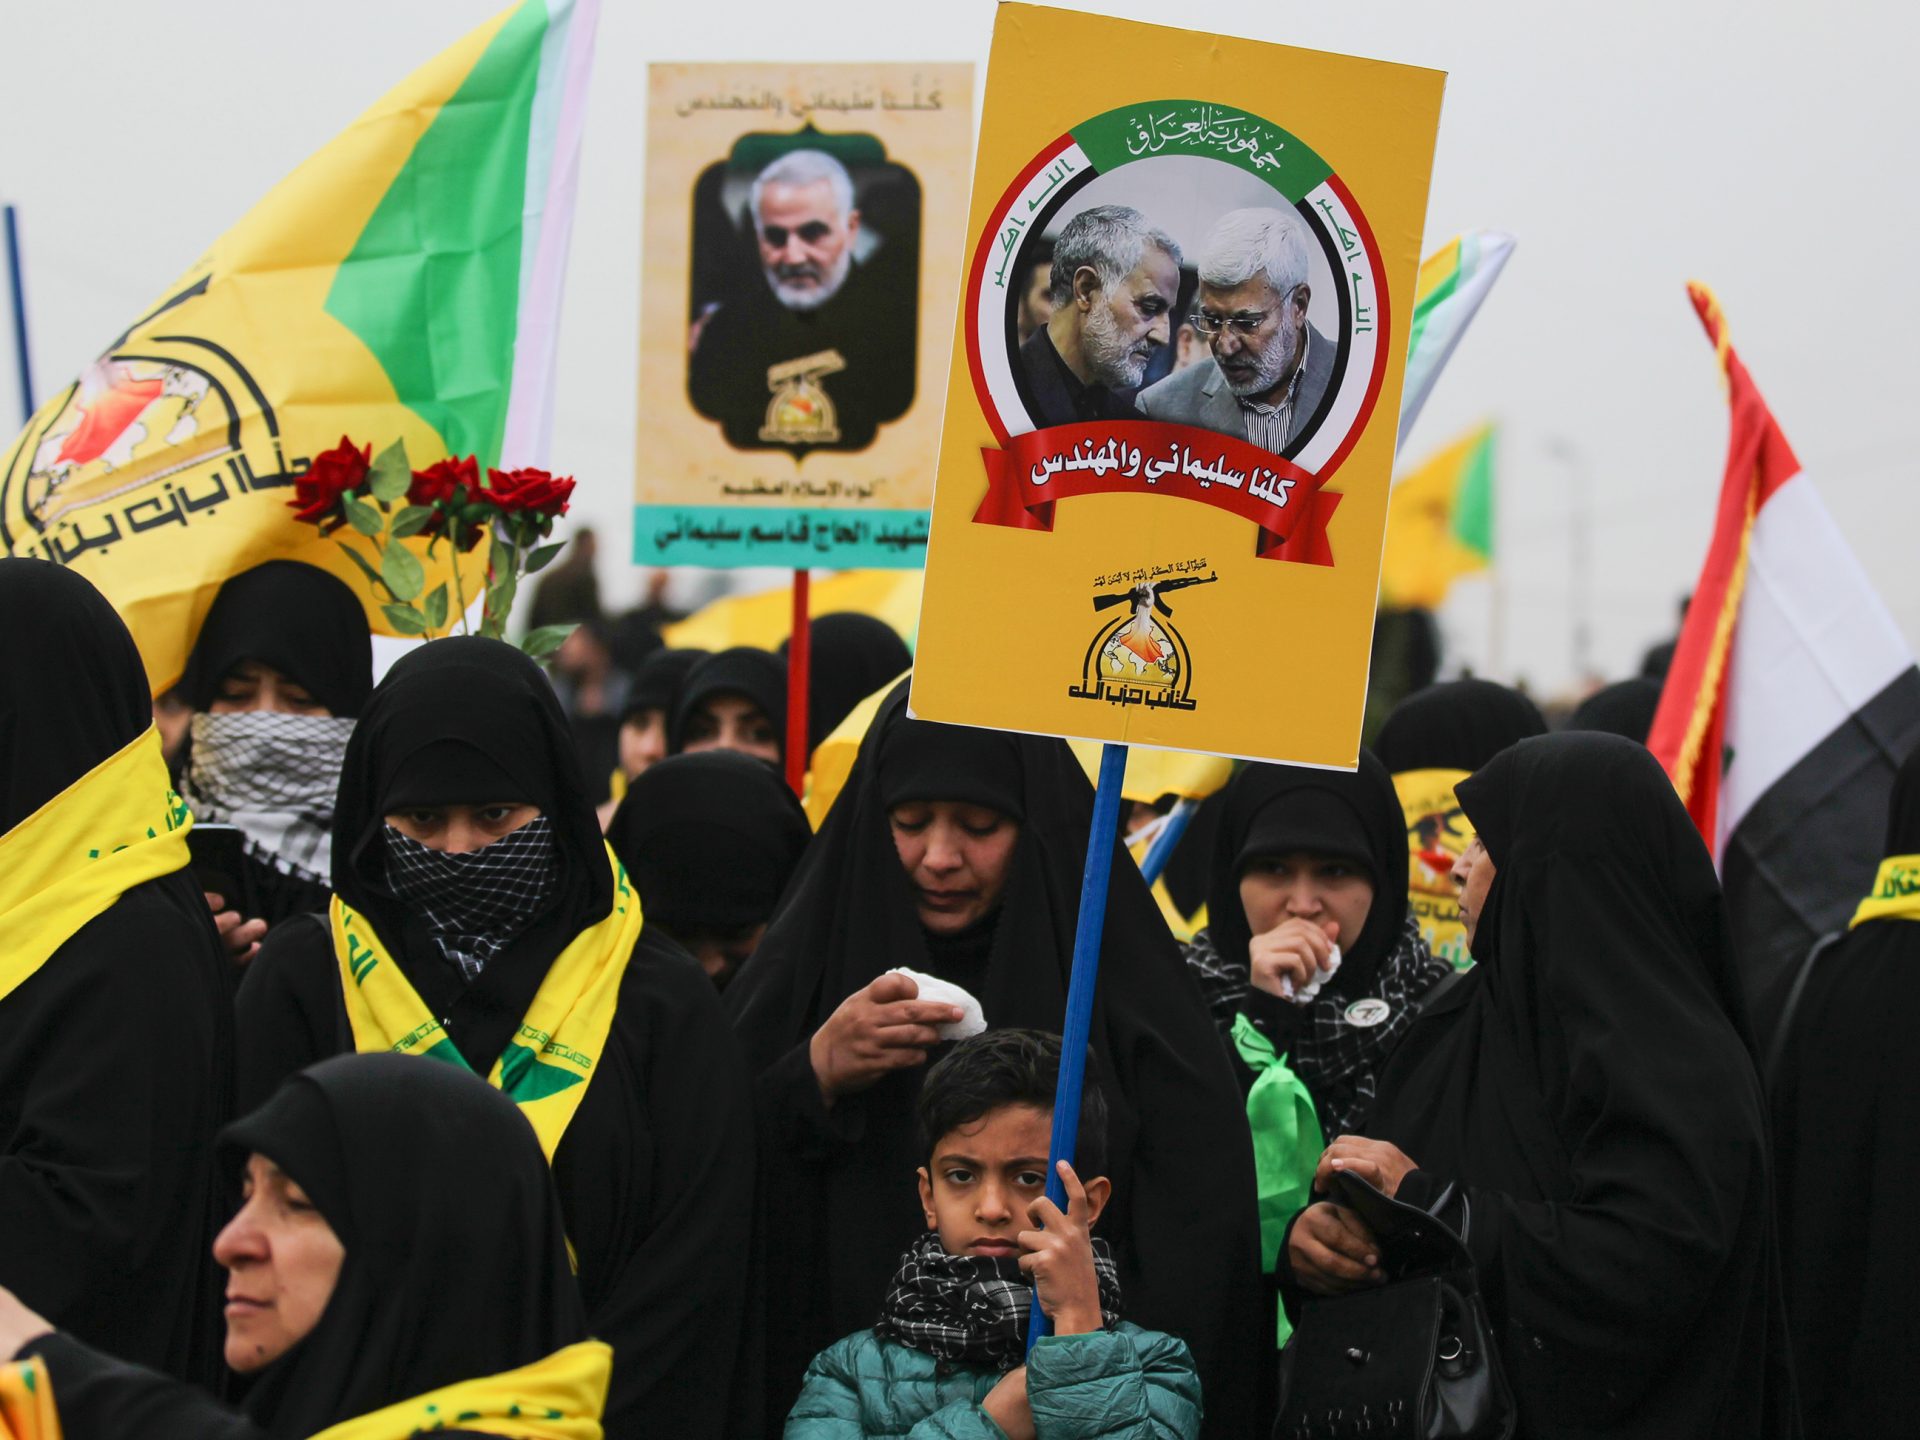 Demonstrators hold aloft portraits of Iraqi paramilitary chief Abu Mahdi al-Muhandis and Iranian military leader Qassem Soleimani during the funeral procession Saturday in Baghdad. The crowd of thousands chanted "Death to America" at times.